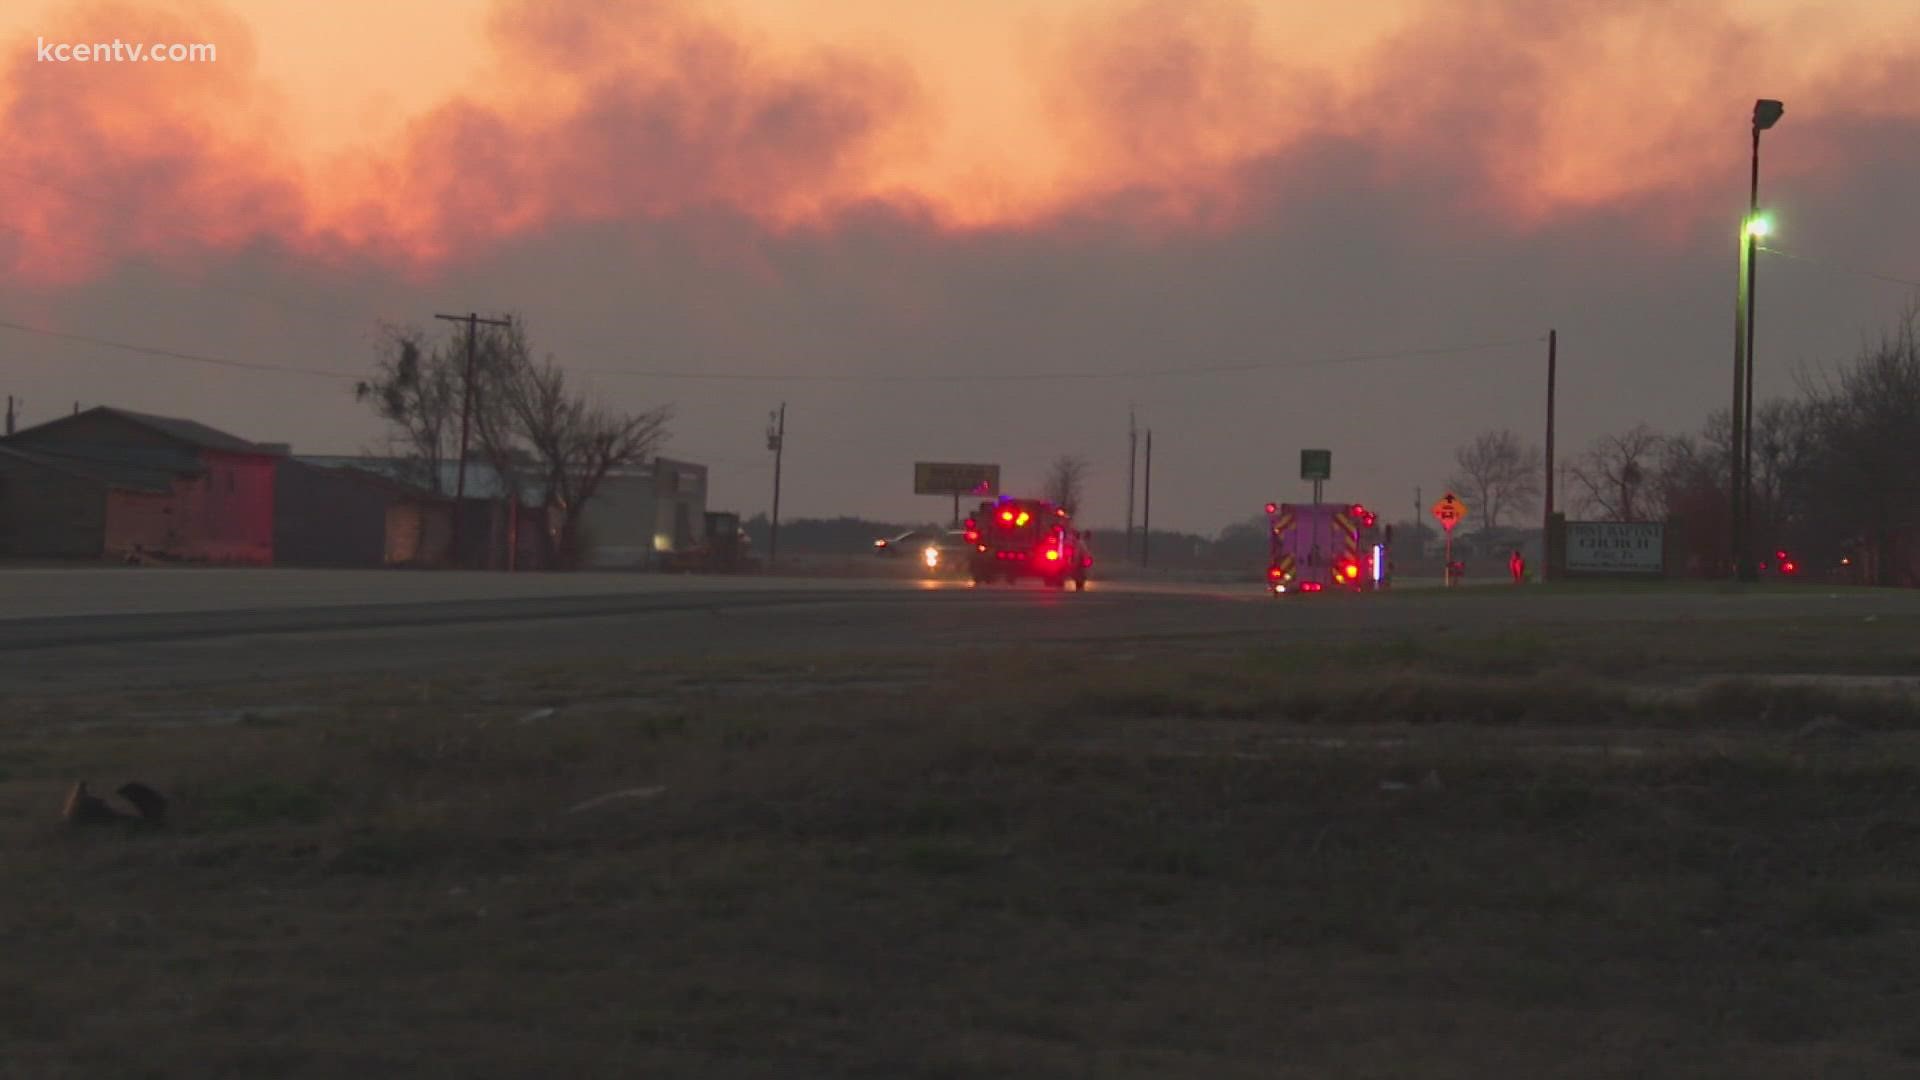 The Crittenburg Complex Fire had burned more than 19,500 acres with 5% containment since Sunday, according to the Texas A&M Forest Service.